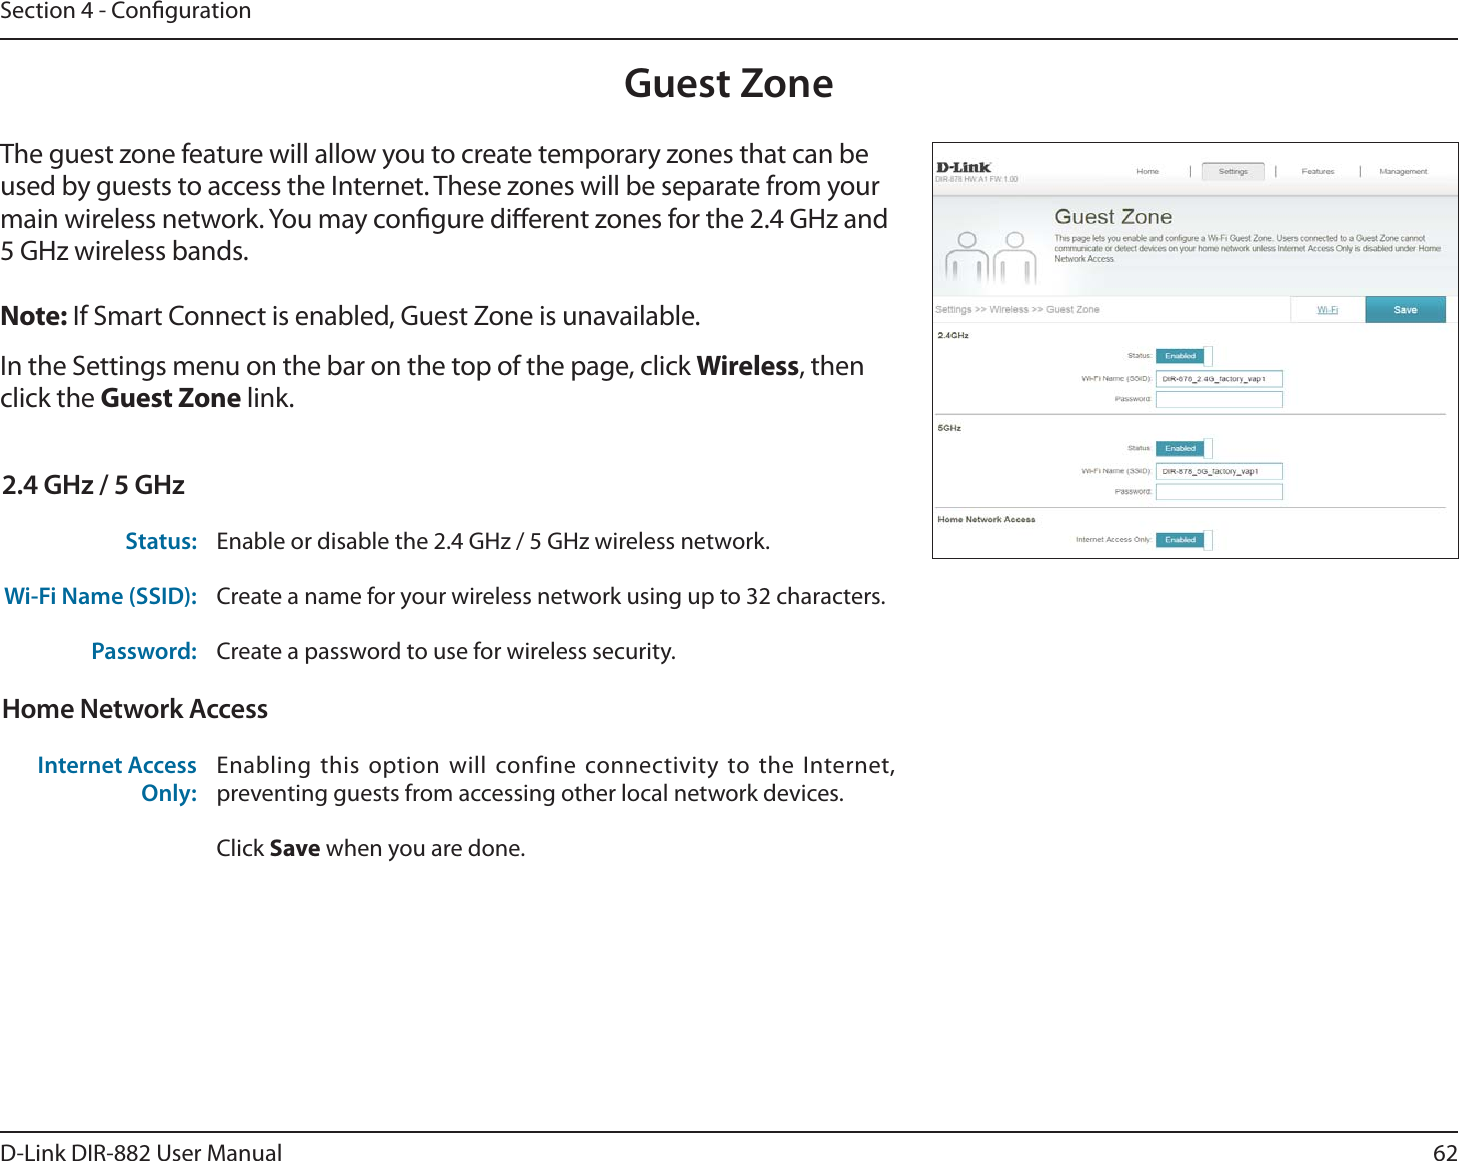 62D-Link DIR-882 User ManualSection 4 - CongurationGuest ZoneIn the Settings menu on the bar on the top of the page, click Wireless, then click the Guest Zone link. The guest zone feature will allow you to create temporary zones that can be used by guests to access the Internet. These zones will be separate from your main wireless network. You may congure dierent zones for the 2.4 GHz and 5 GHz wireless bands.Note: If Smart Connect is enabled, Guest Zone is unavailable.2.4 GHz / 5 GHzStatus: Enable or disable the 2.4 GHz / 5 GHz wireless network.Wi-Fi Name (SSID): Create a name for your wireless network using up to 32 characters. Password: Create a password to use for wireless security. Home Network AccessInternet Access Only:Enabling this option will confine connectivity to the Internet, preventing guests from accessing other local network devices.Click Save when you are done.